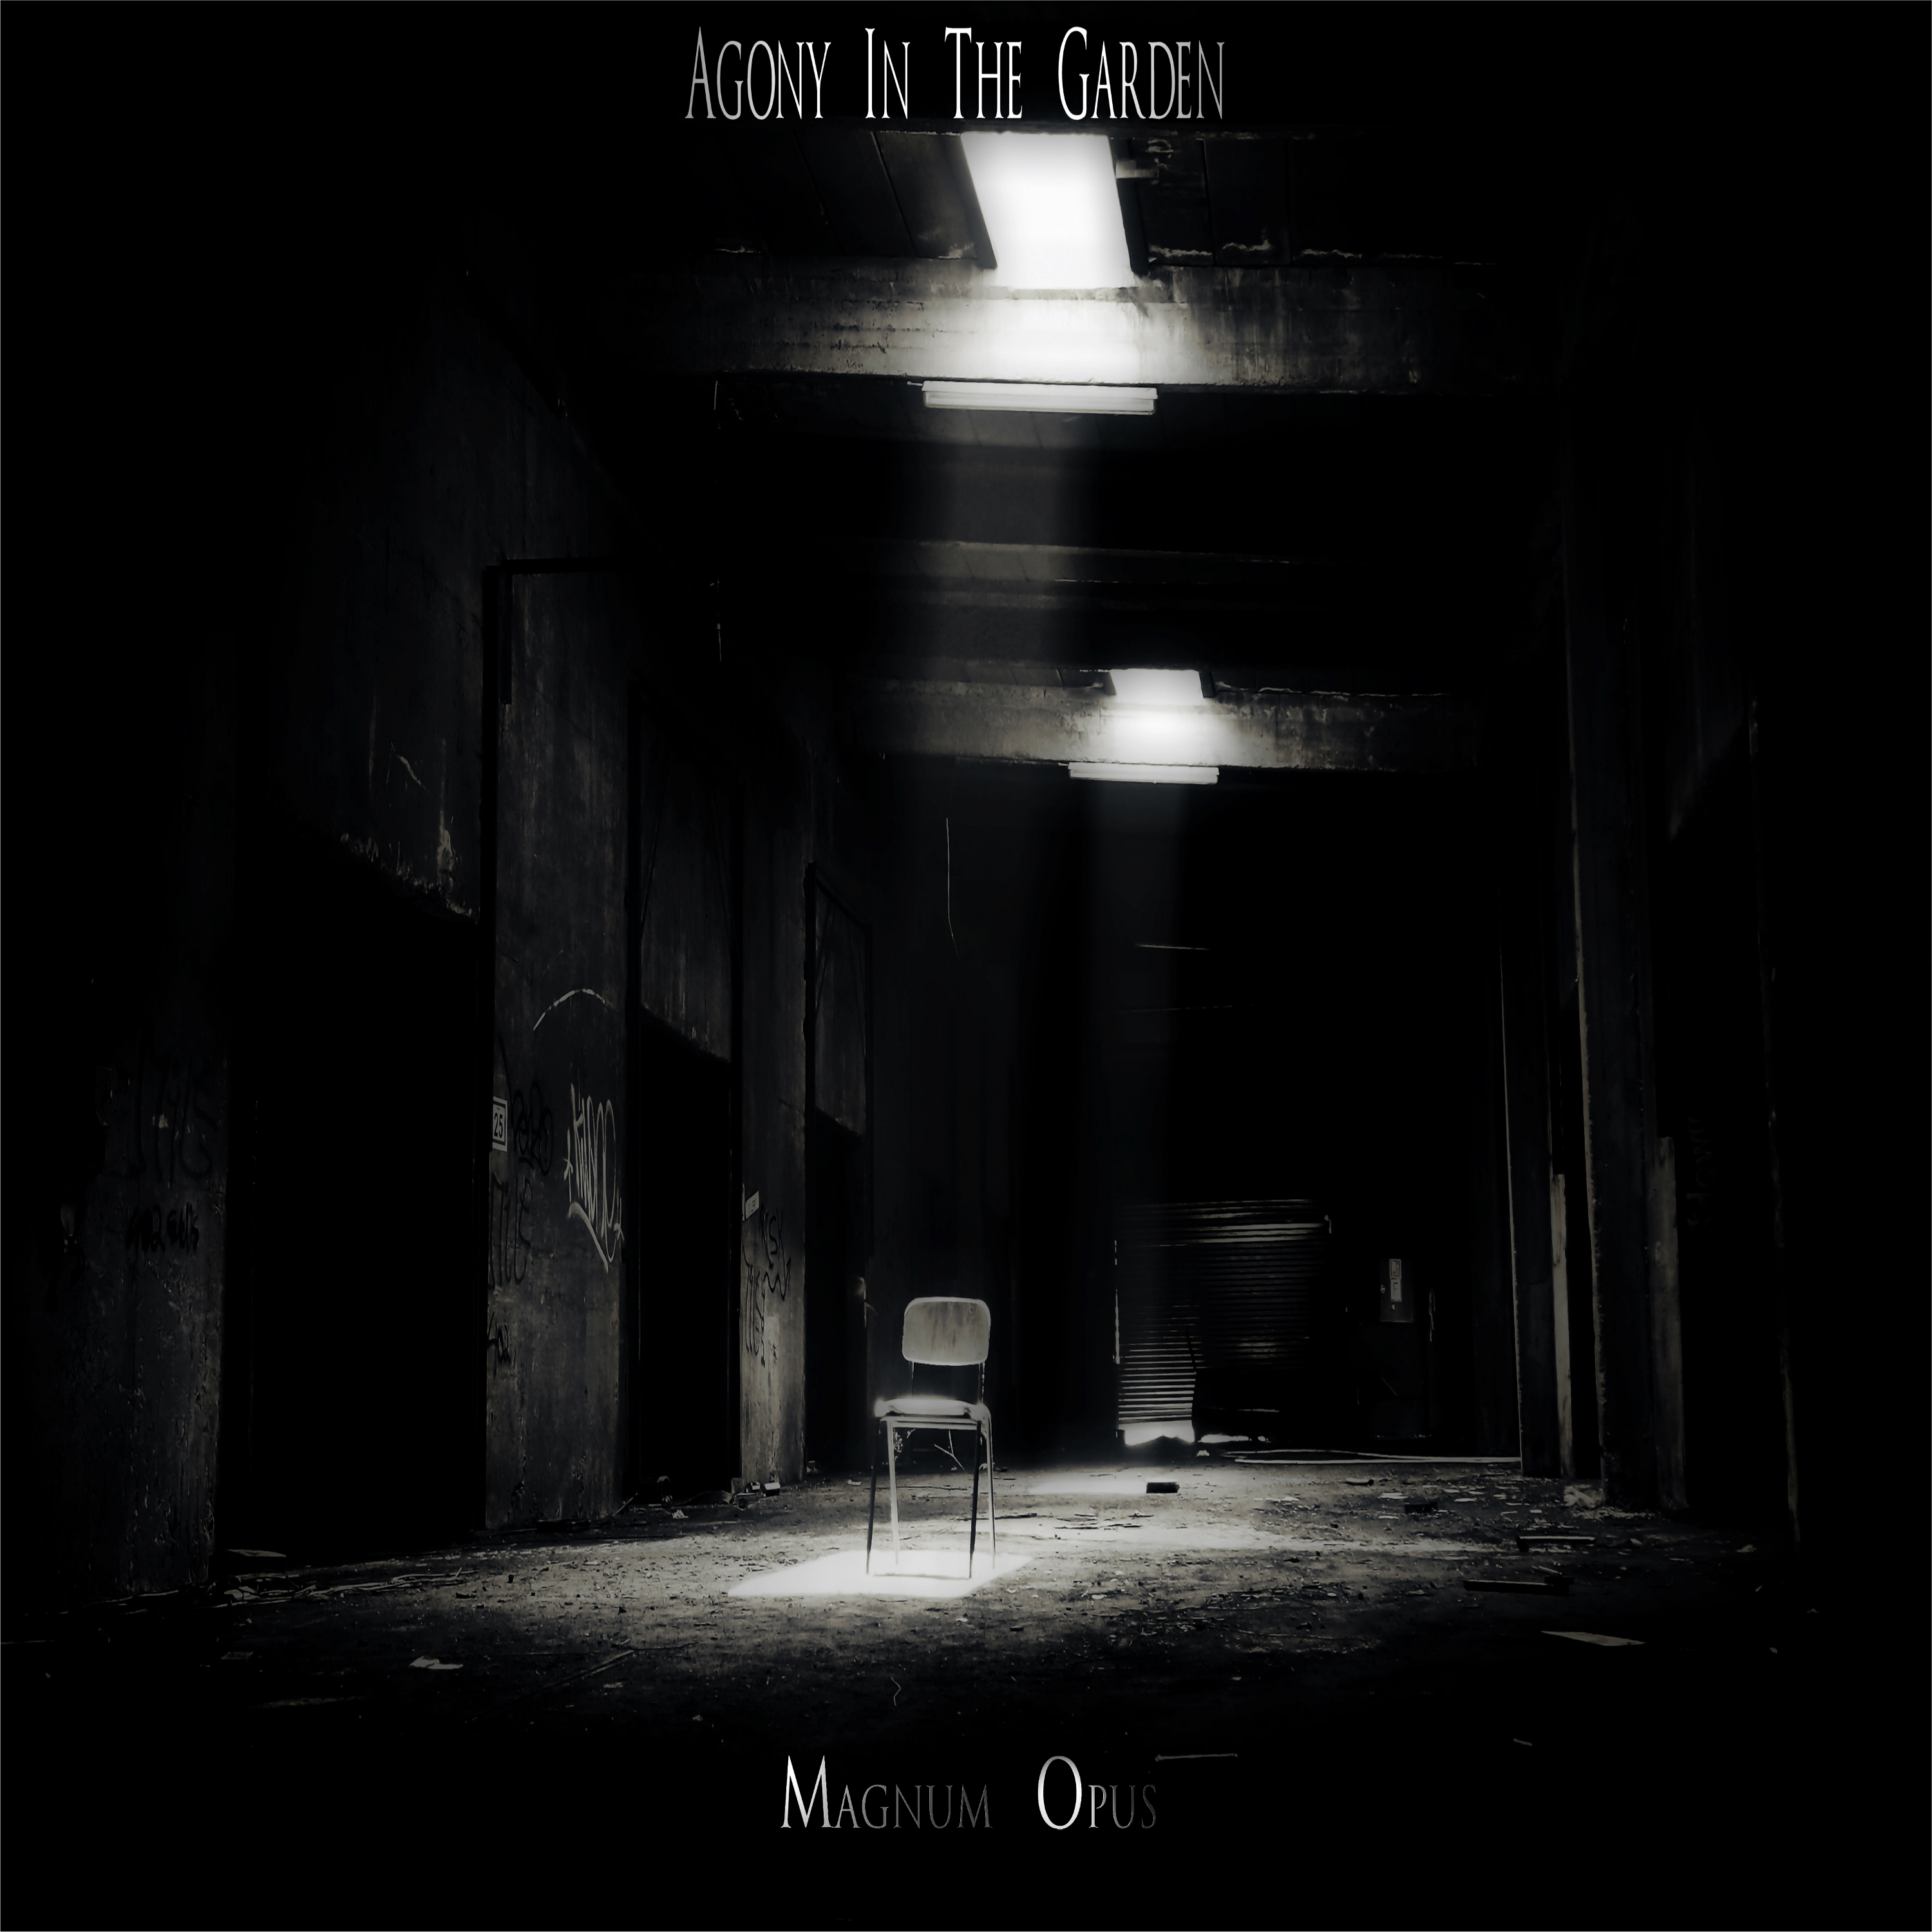 Agony In The Garden’s To Release New Single "Magnum Opus" On Friday June 3rd, 2022 